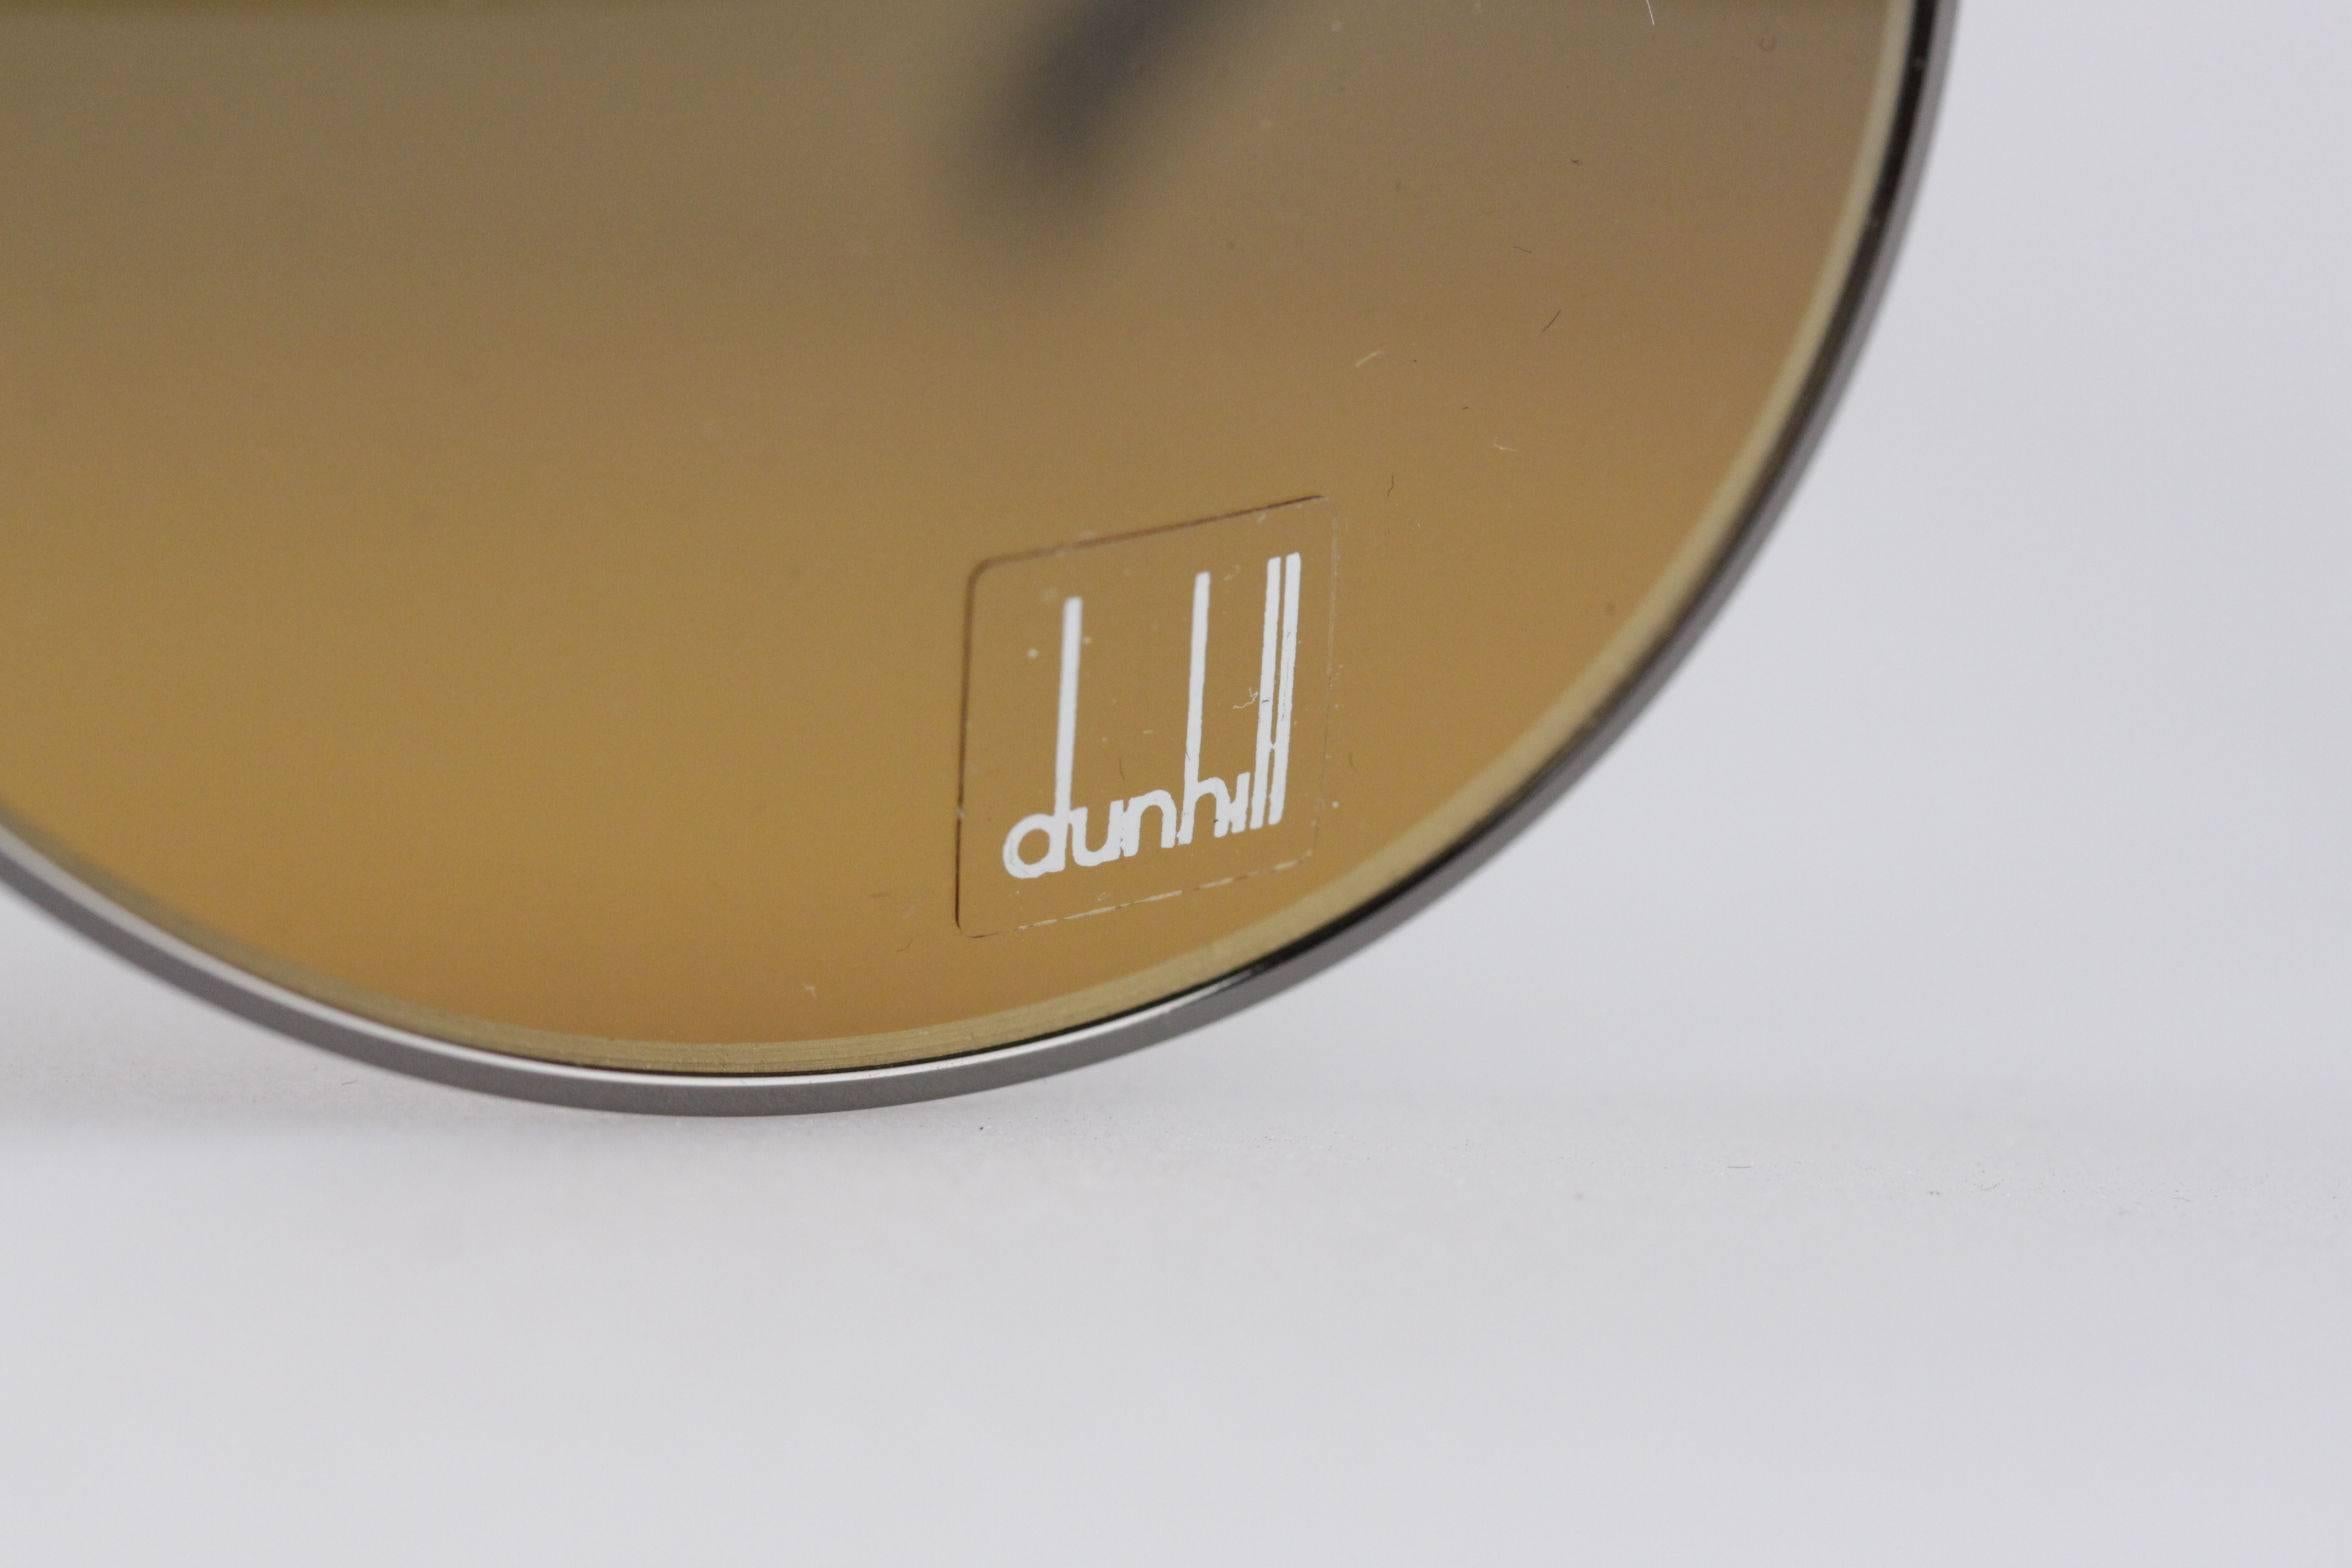 Women's or Men's Authentic Dunhill Green Sunglasses Mod. DU51101 Action Golf 59mm New Old Stock